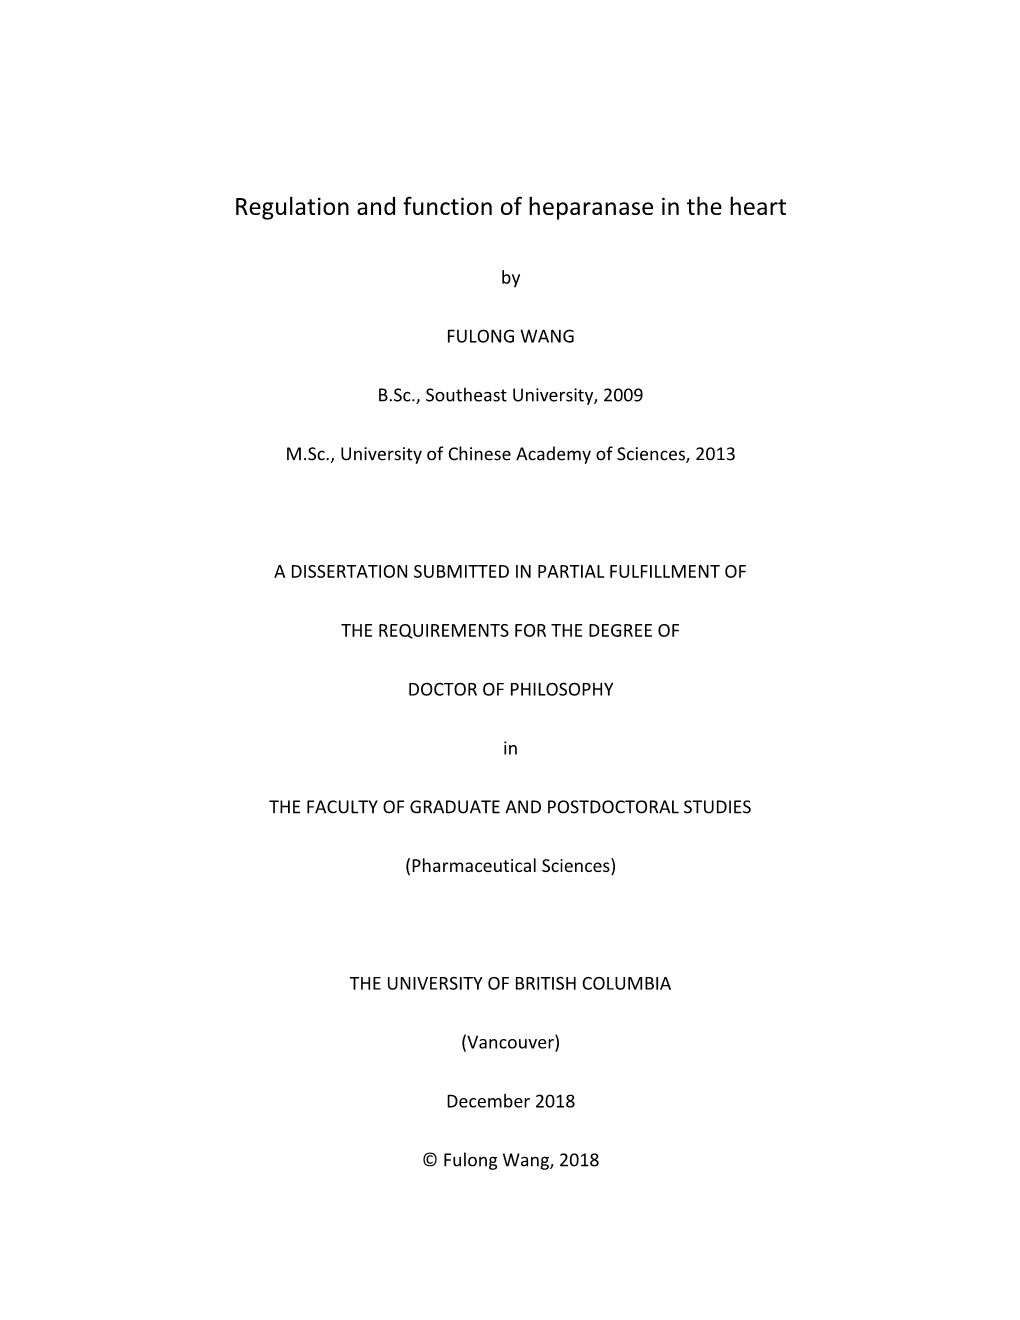 Regulation and Function of Heparanase in the Heart